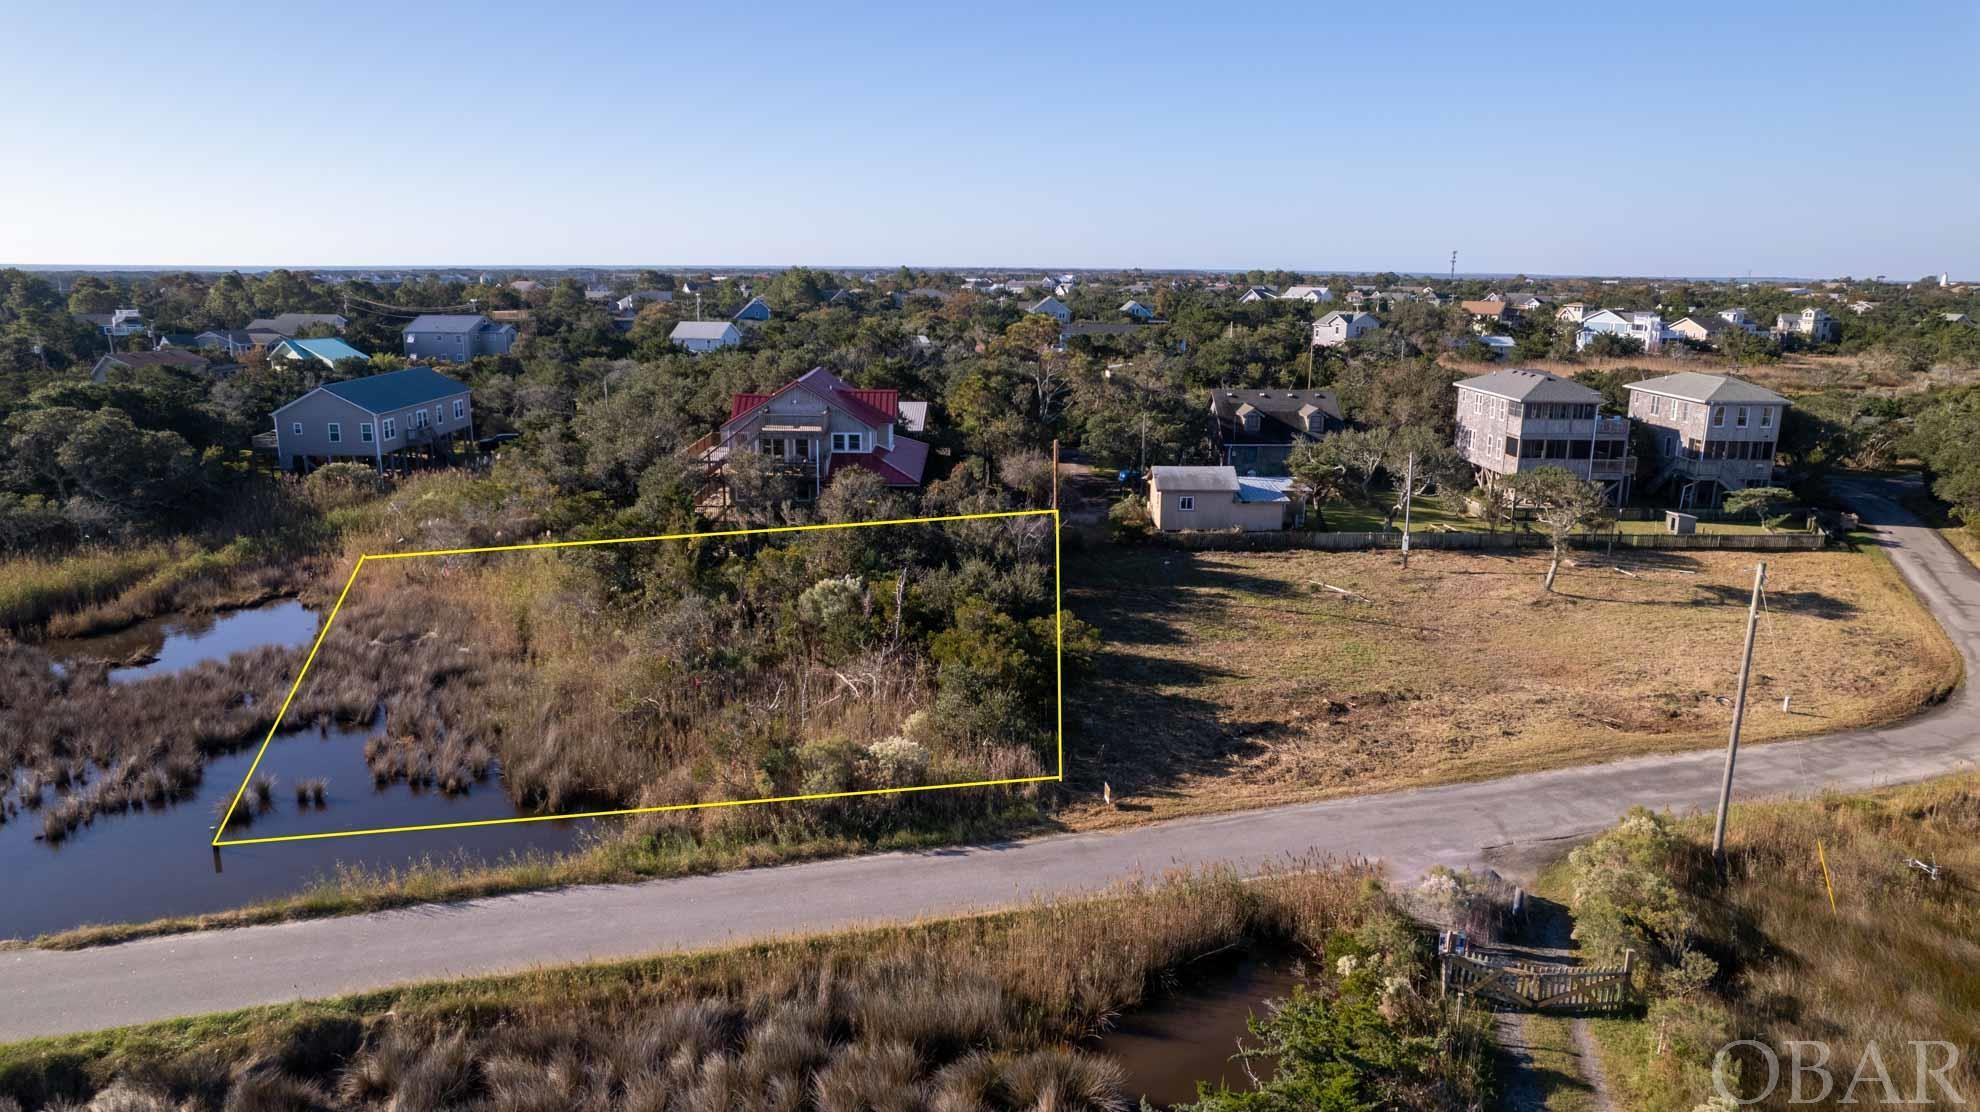 176 ONeal Drive, Ocracoke, NC 27960, ,Lots/land,For sale,ONeal Drive,123775